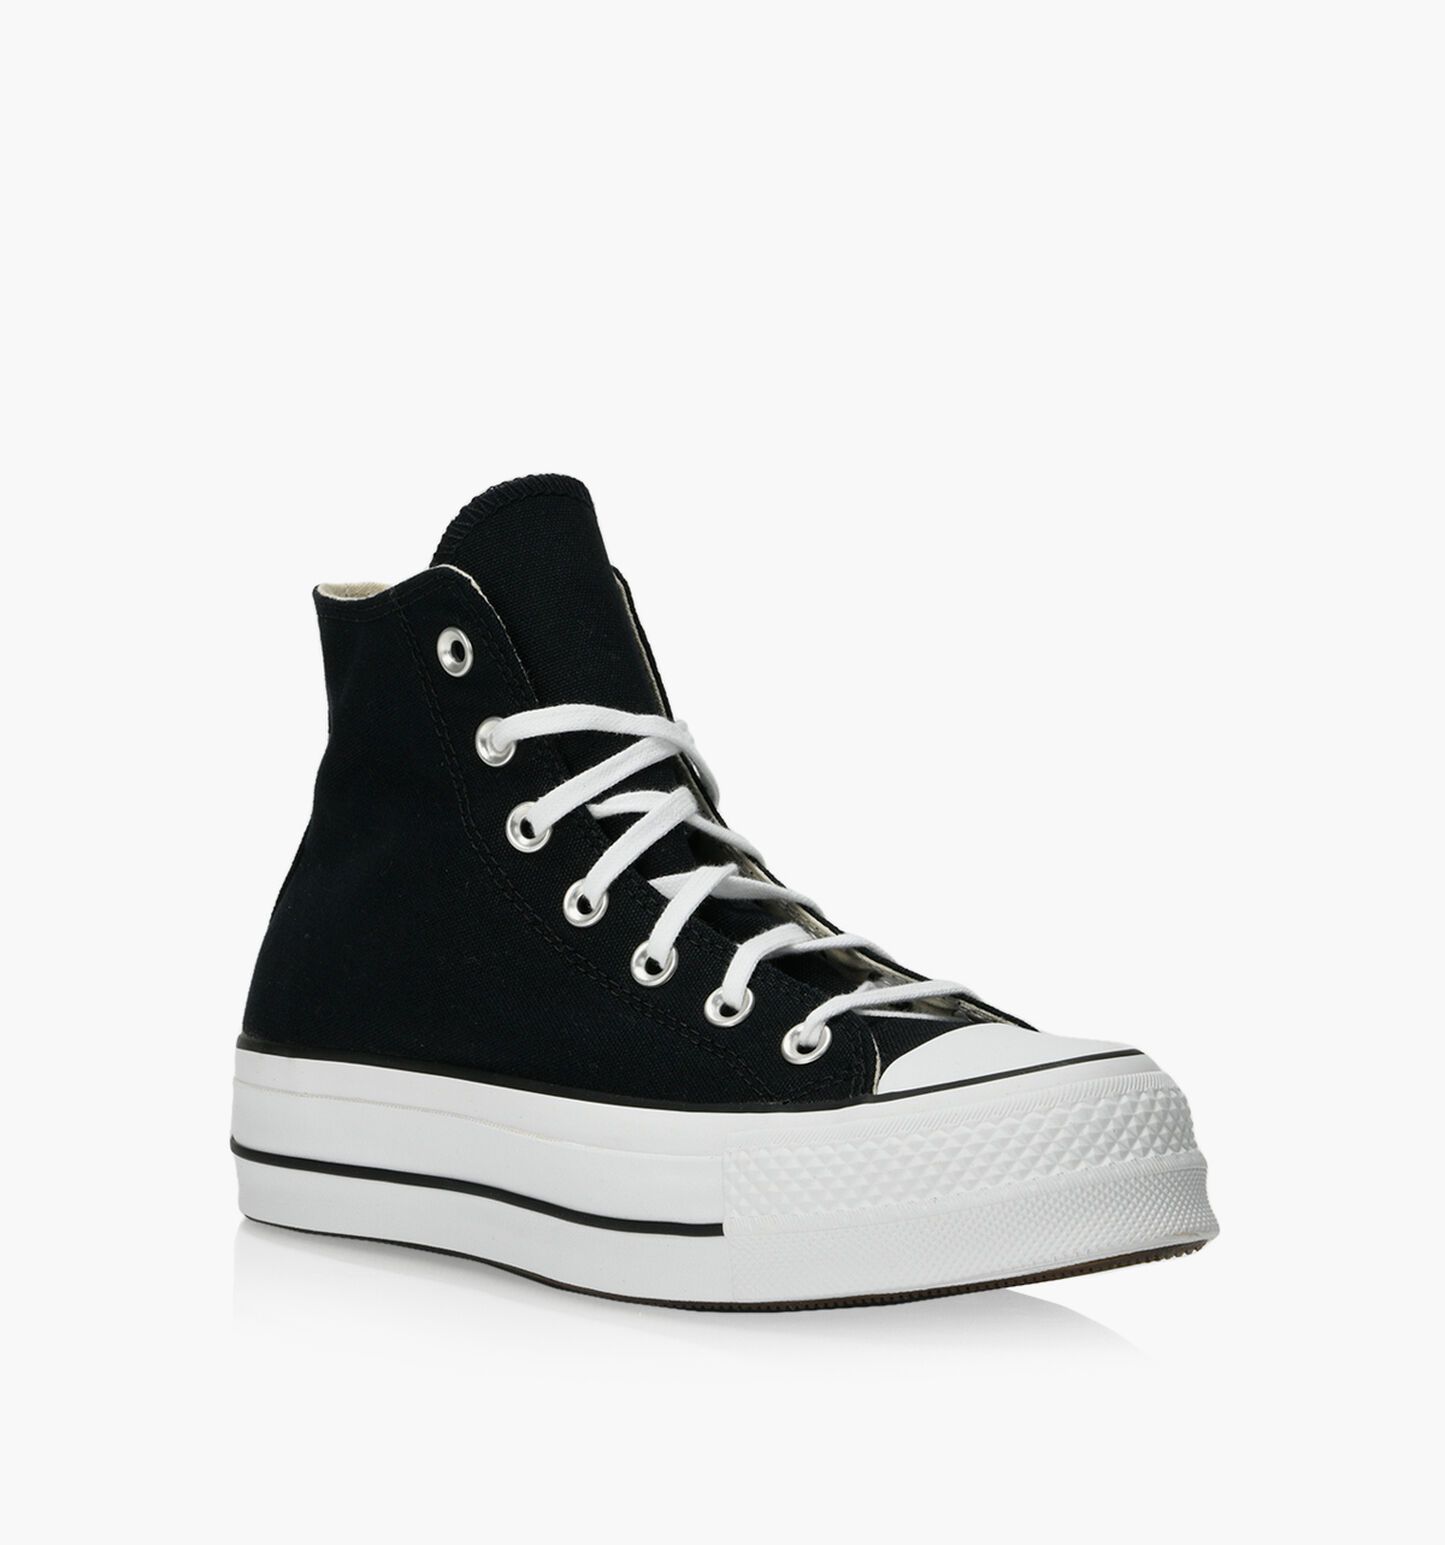 CONVERSE PLATFORM CHUCK TAYLOR ALL STAR HIGH TOP - Fabric | BrownsShoes | Browns Shoes